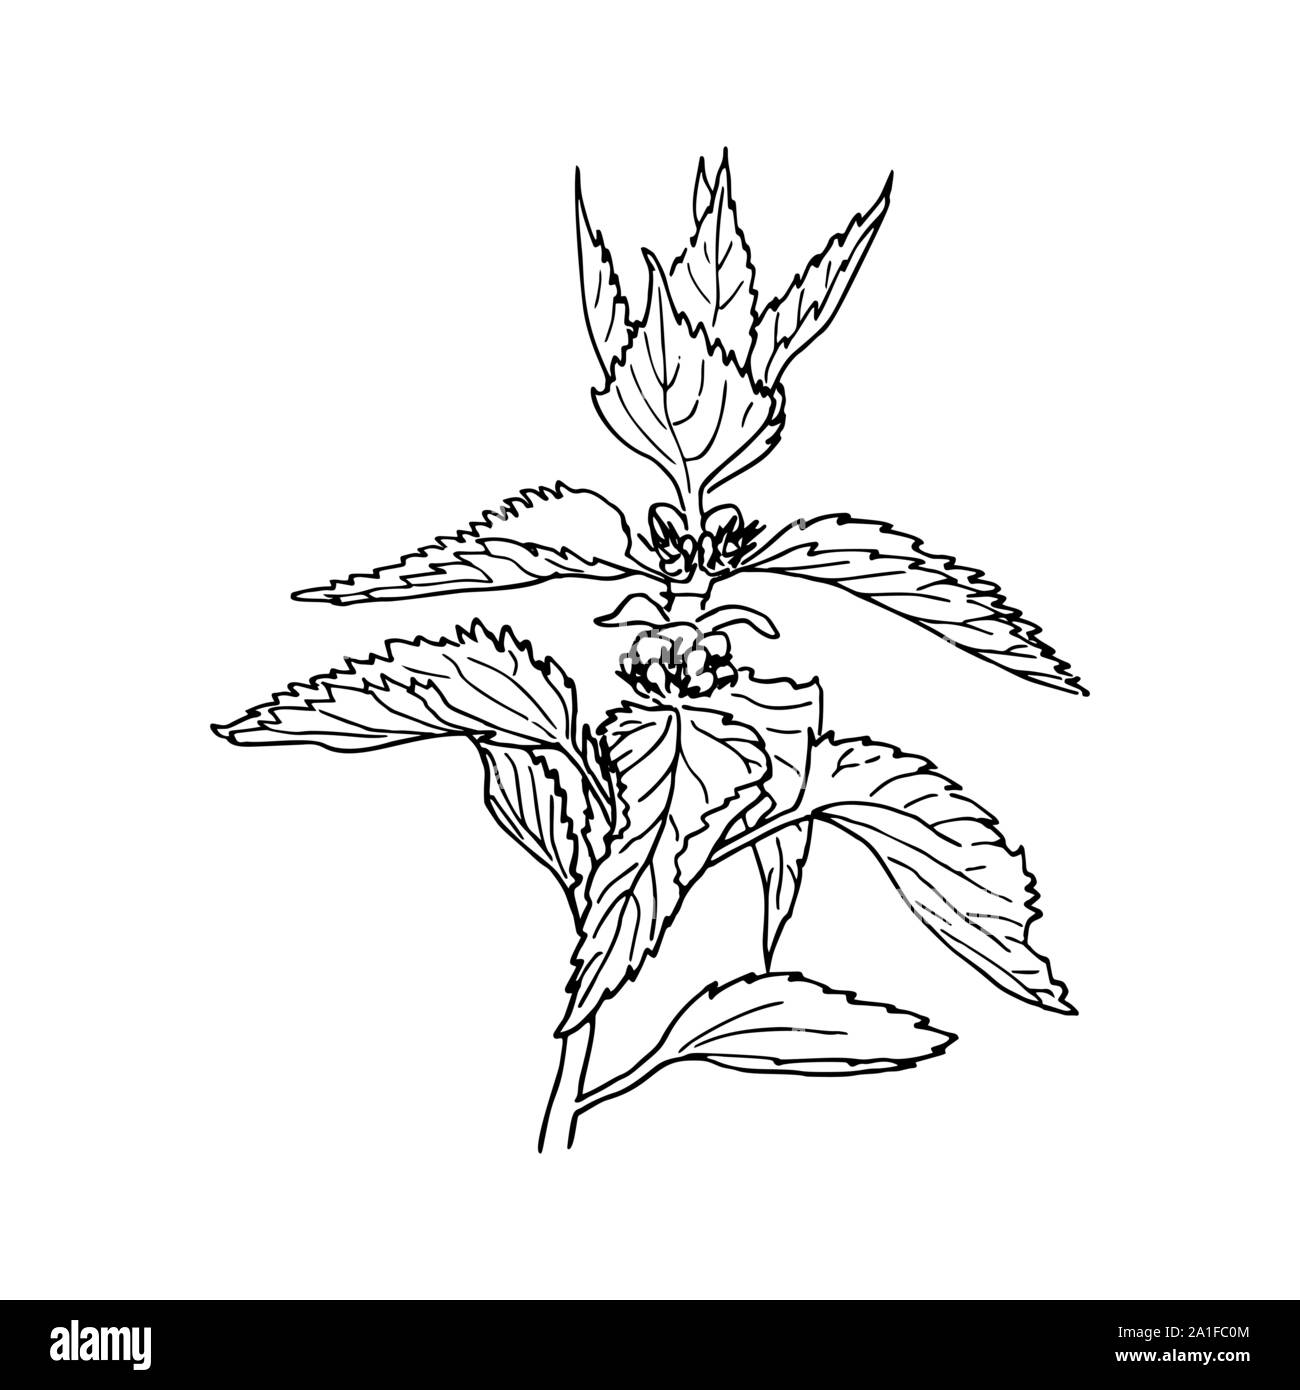 Nettle medical plant with leaves. Herbal hand drawn engraving illustration, minimalism style. Ink pen vintage sketch Stock Vector